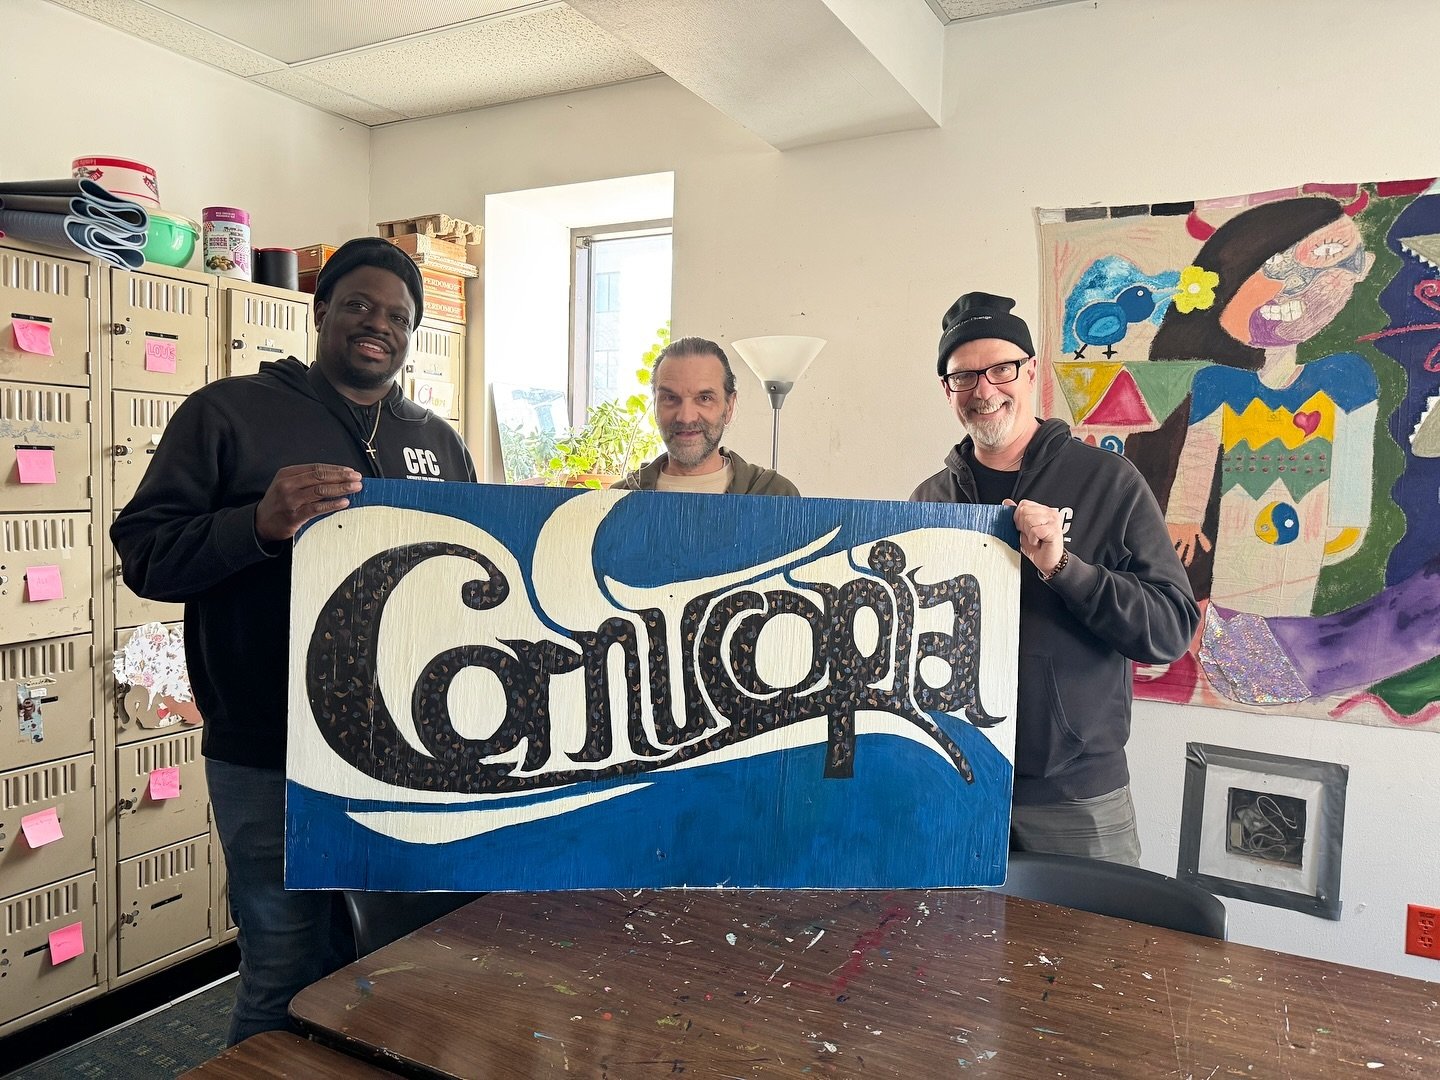 Catalyst for Change staff and clients love partnering with Cornucopia! Cornucopia is an arts and wellness center run by and for individuals in mental health and substance use recovery. Cornucopia has been an excellent resource and place of connection